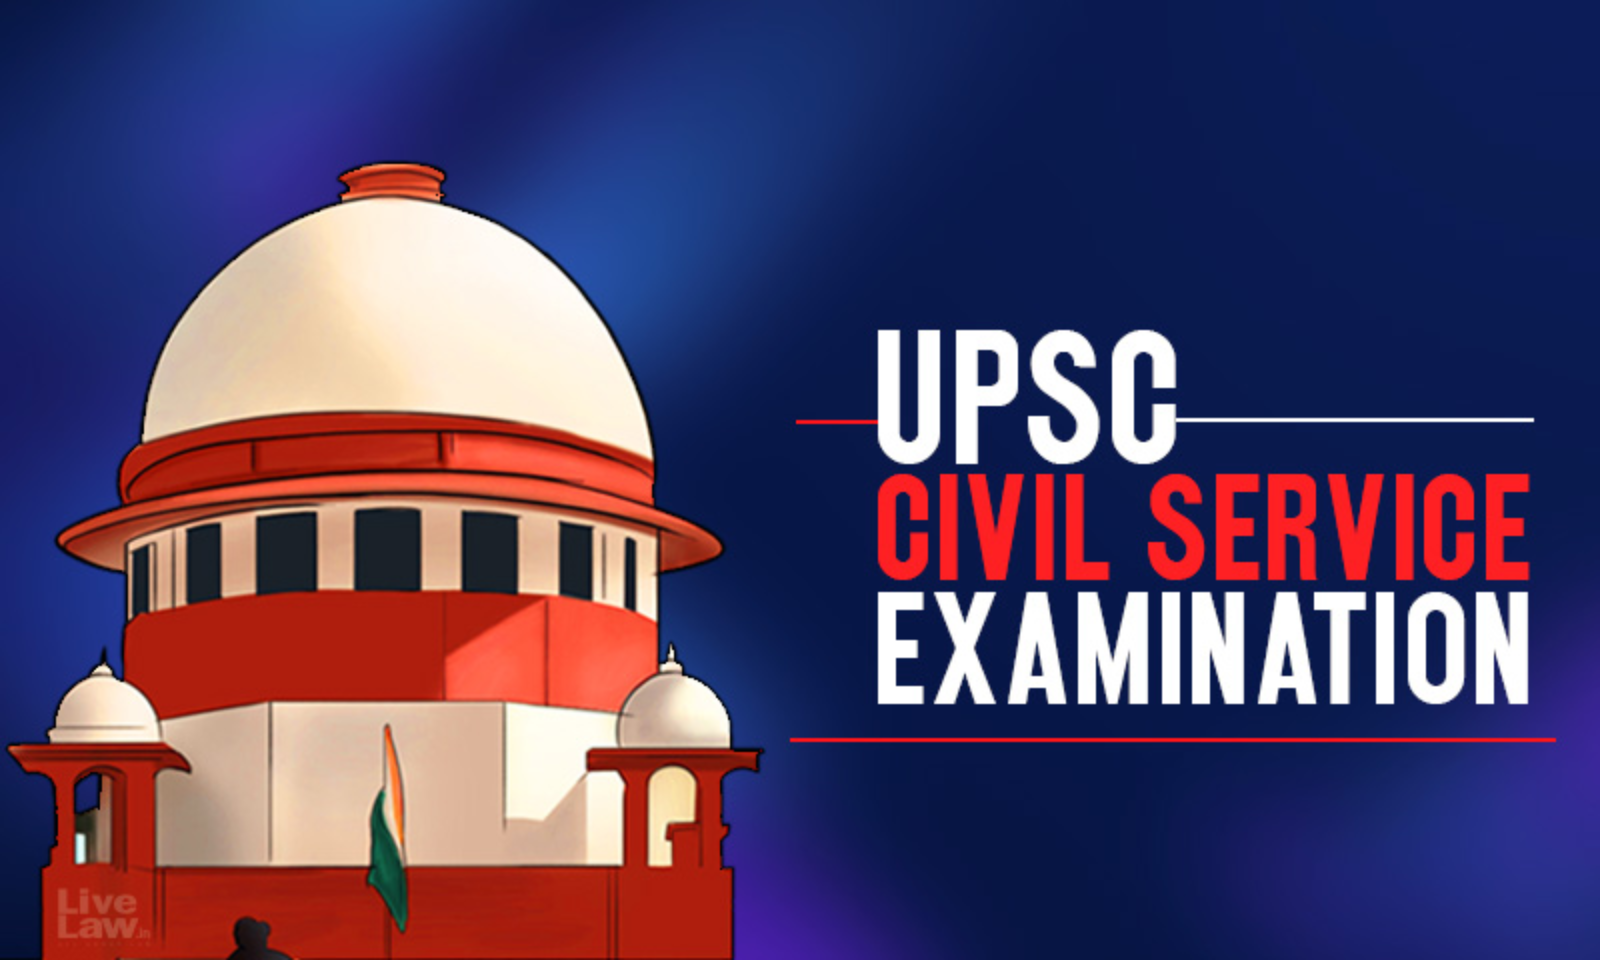 The Ultimate Collection of Full 4K Upsc Images Top 999+ Astonishing